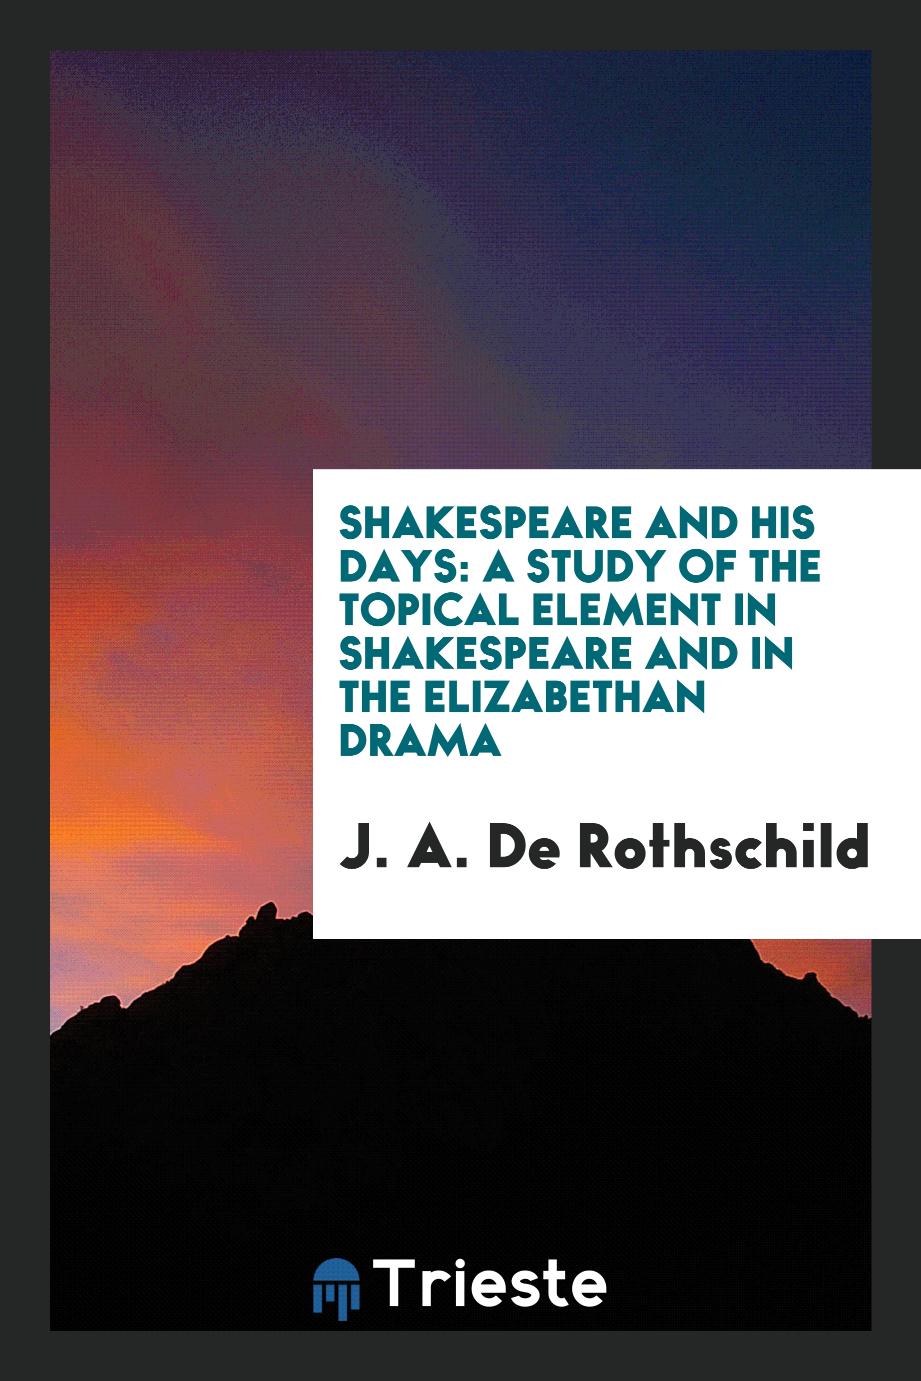 Shakespeare and his days: a study of the topical element in Shakespeare and in the Elizabethan drama